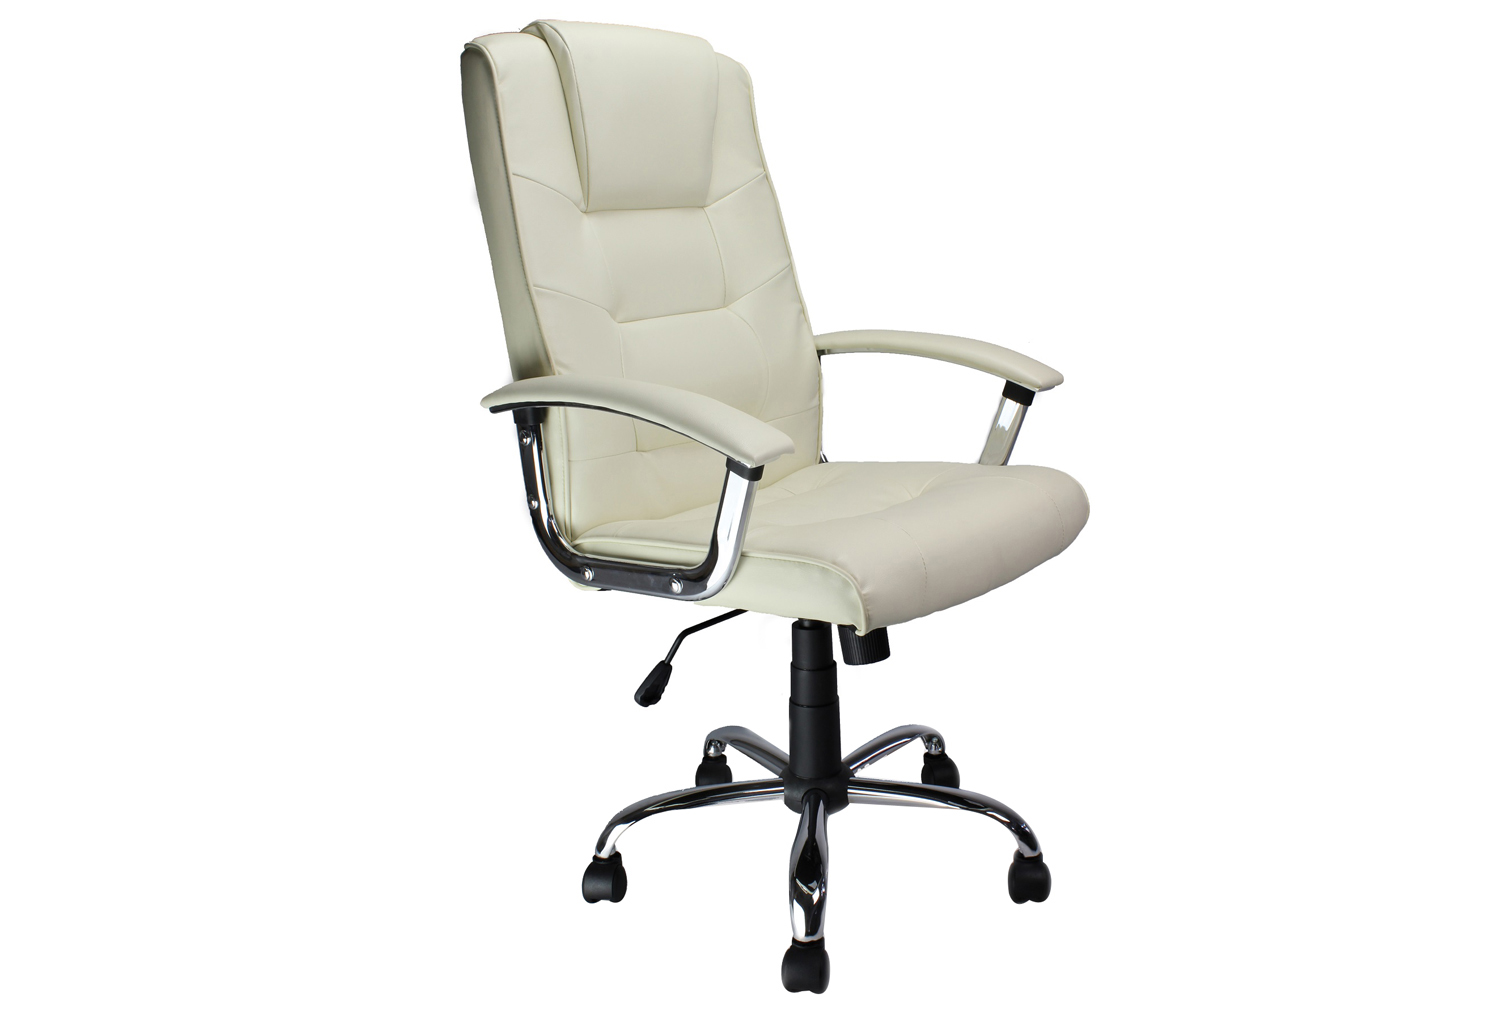 Skye High Back Cream Leather Faced Executive Office Chair, Cream, Express Delivery